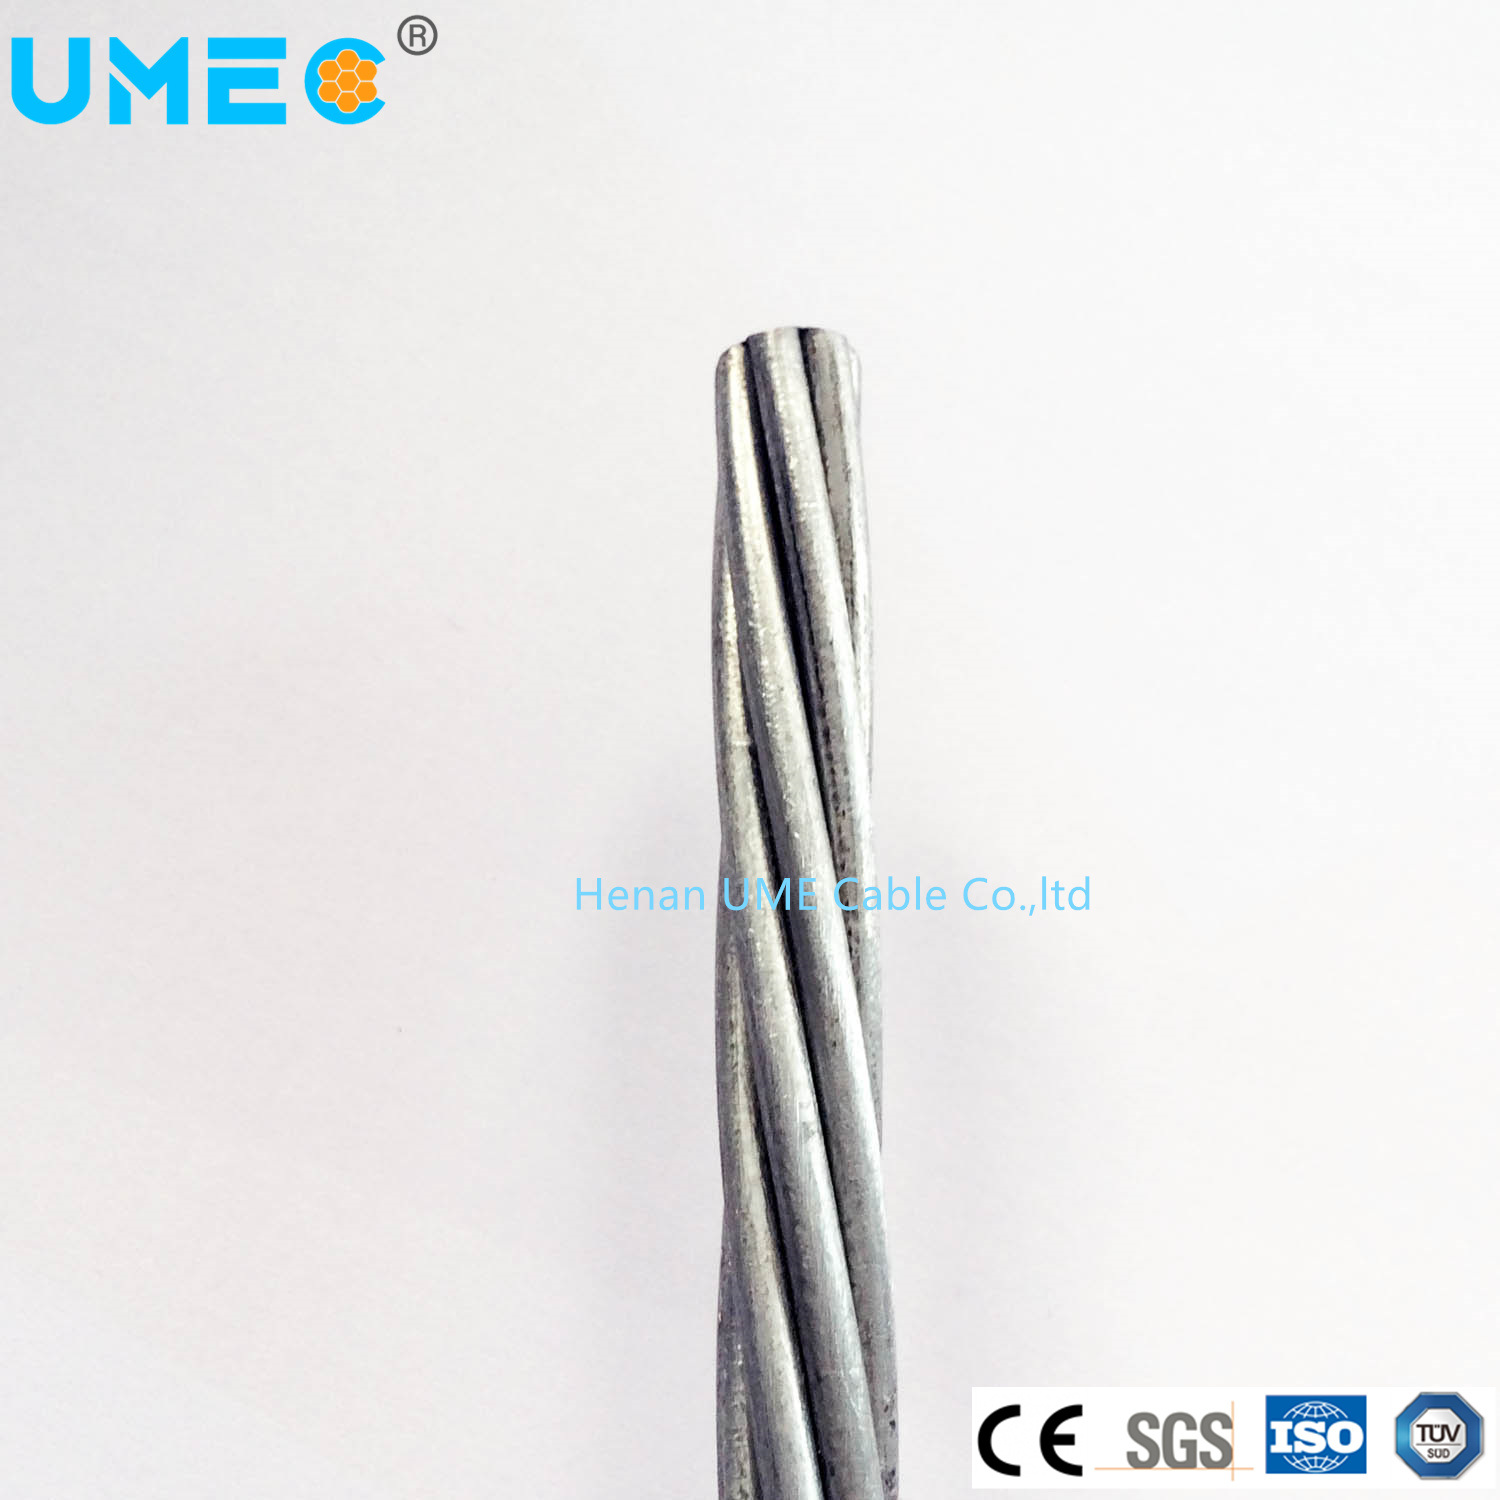 Electrical Steel Cable Low Carbon Steel Rod for Iron Nail Making 7/4.0mm 19/1.6mm 19/4.0mm Galvanized Steel Wire Strand Electrical Cable